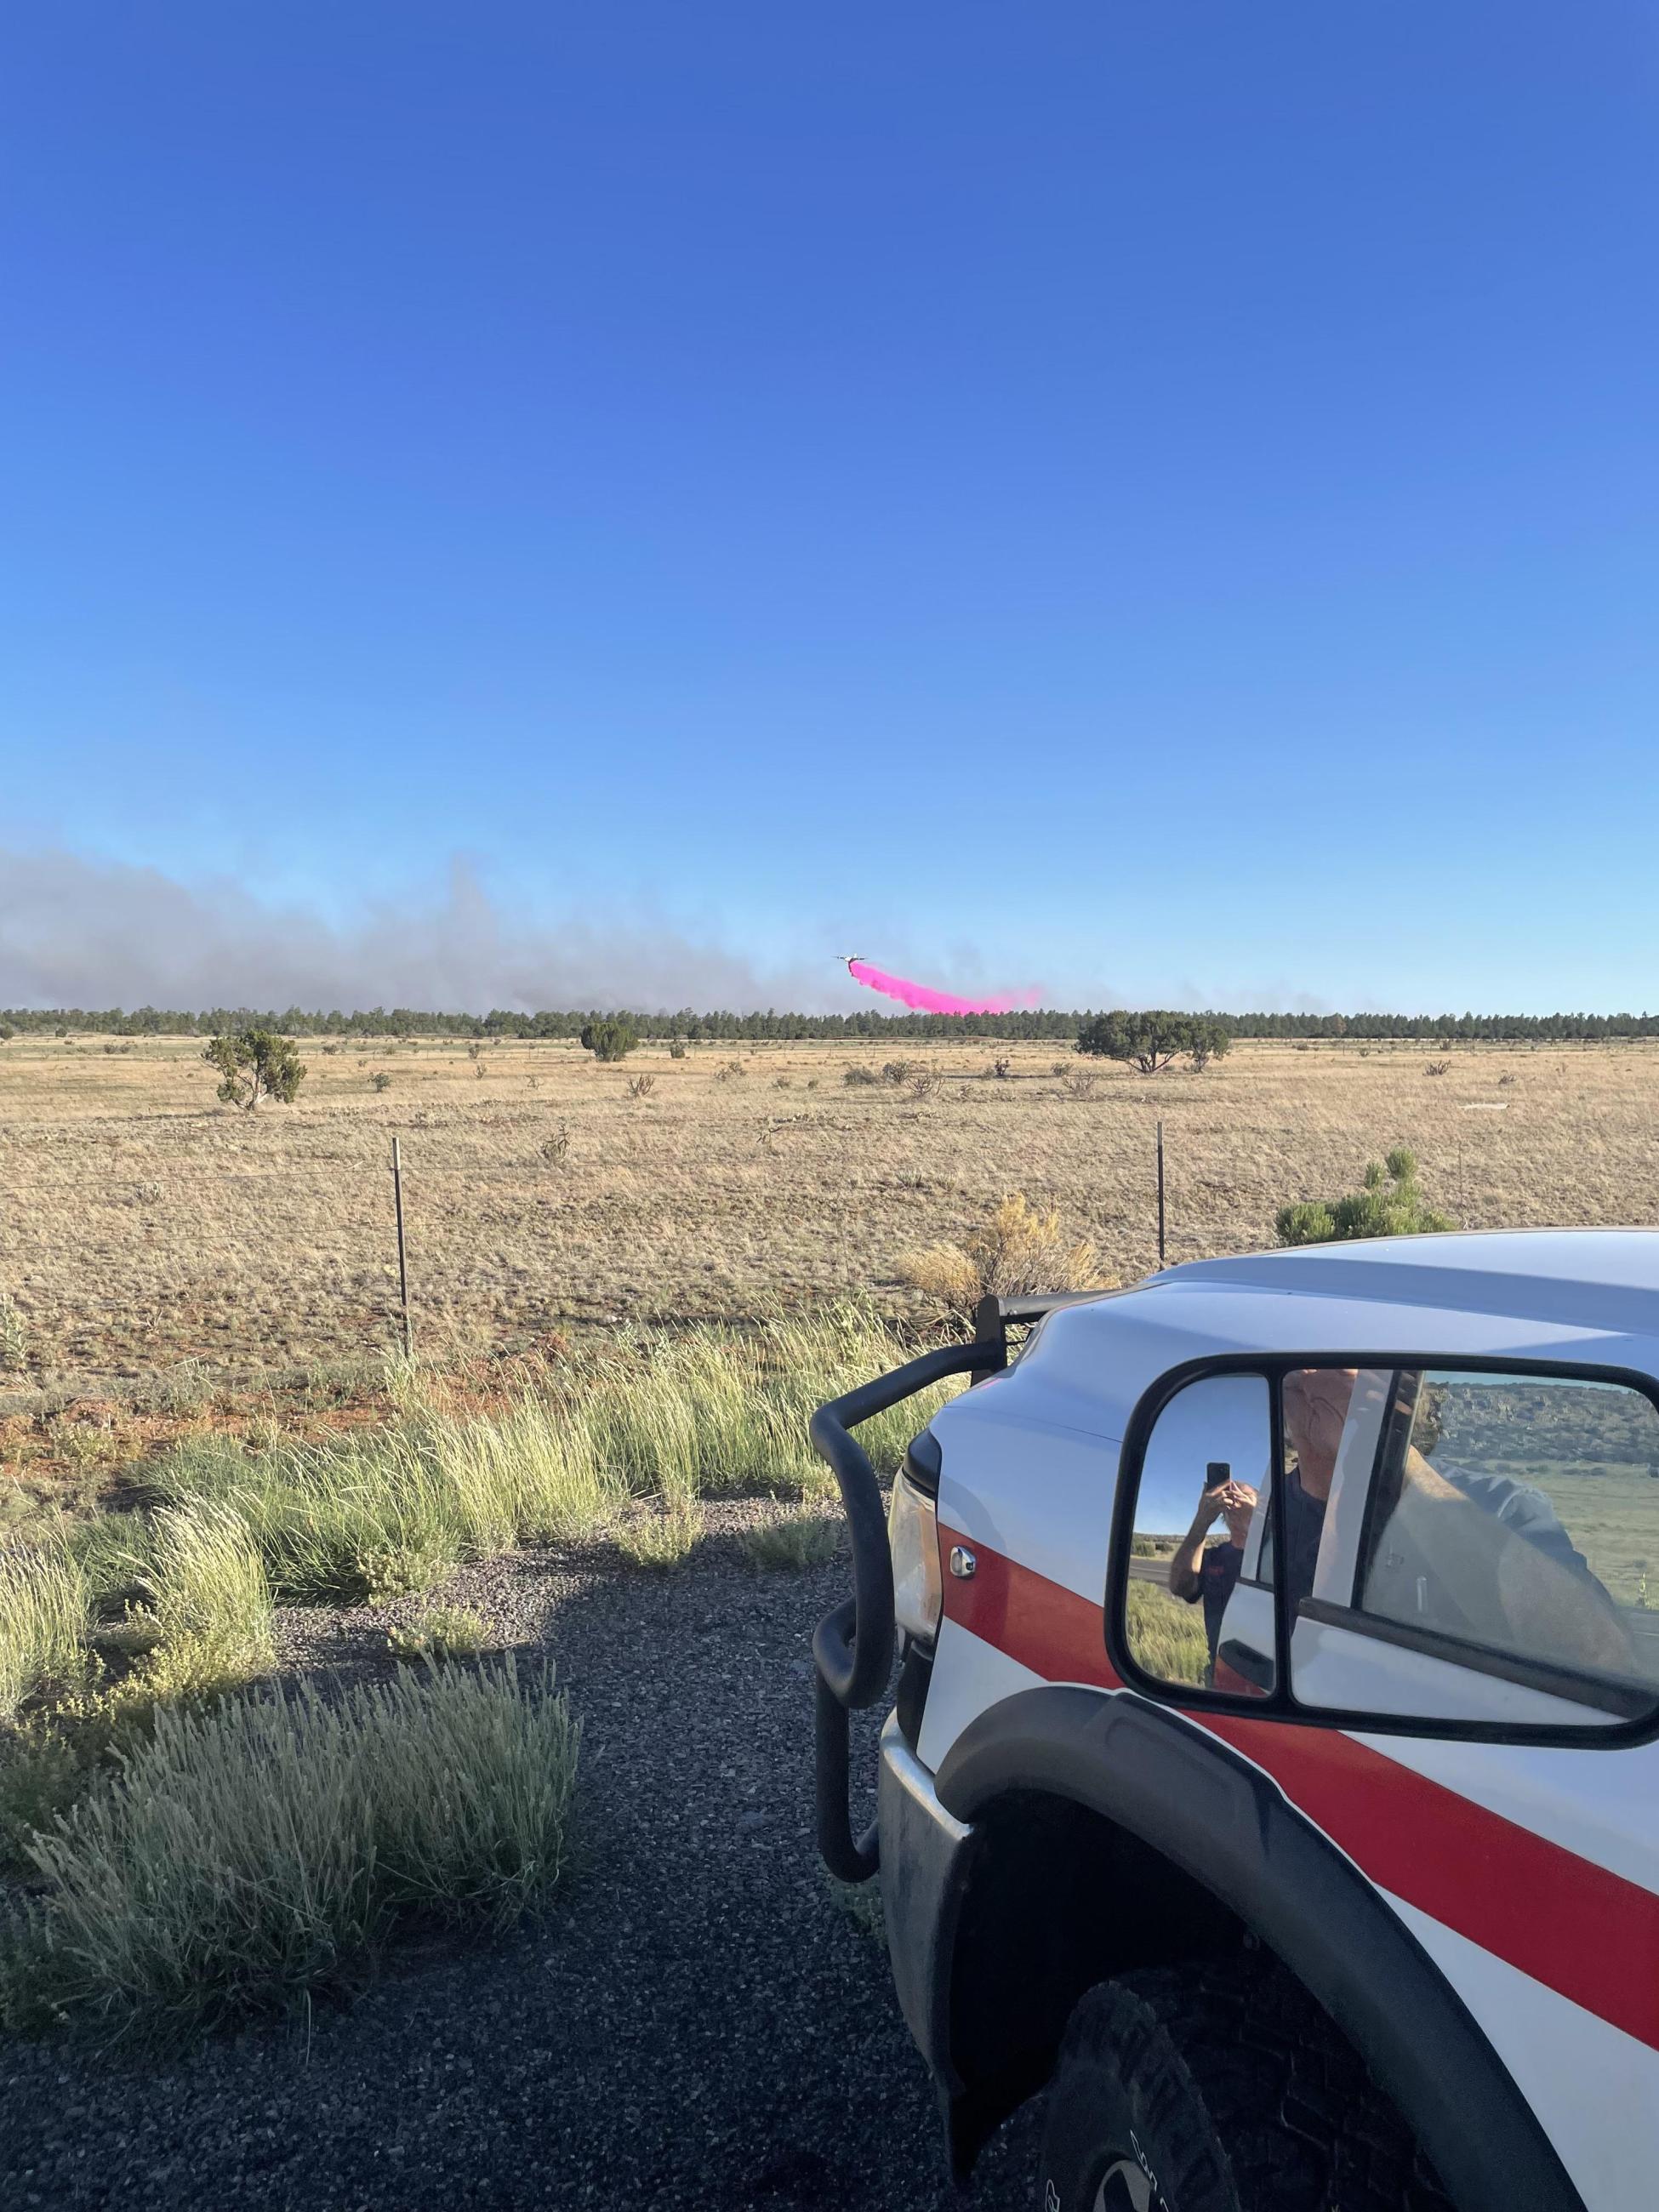 An air tanker lays down a line of retardant over the Encerrita Fire in El Malpais National Monument. The plane is barely visible but a long pink line of retardant is visible through the smoke. The photo is taken from a vehicle with grass along the roadside. 